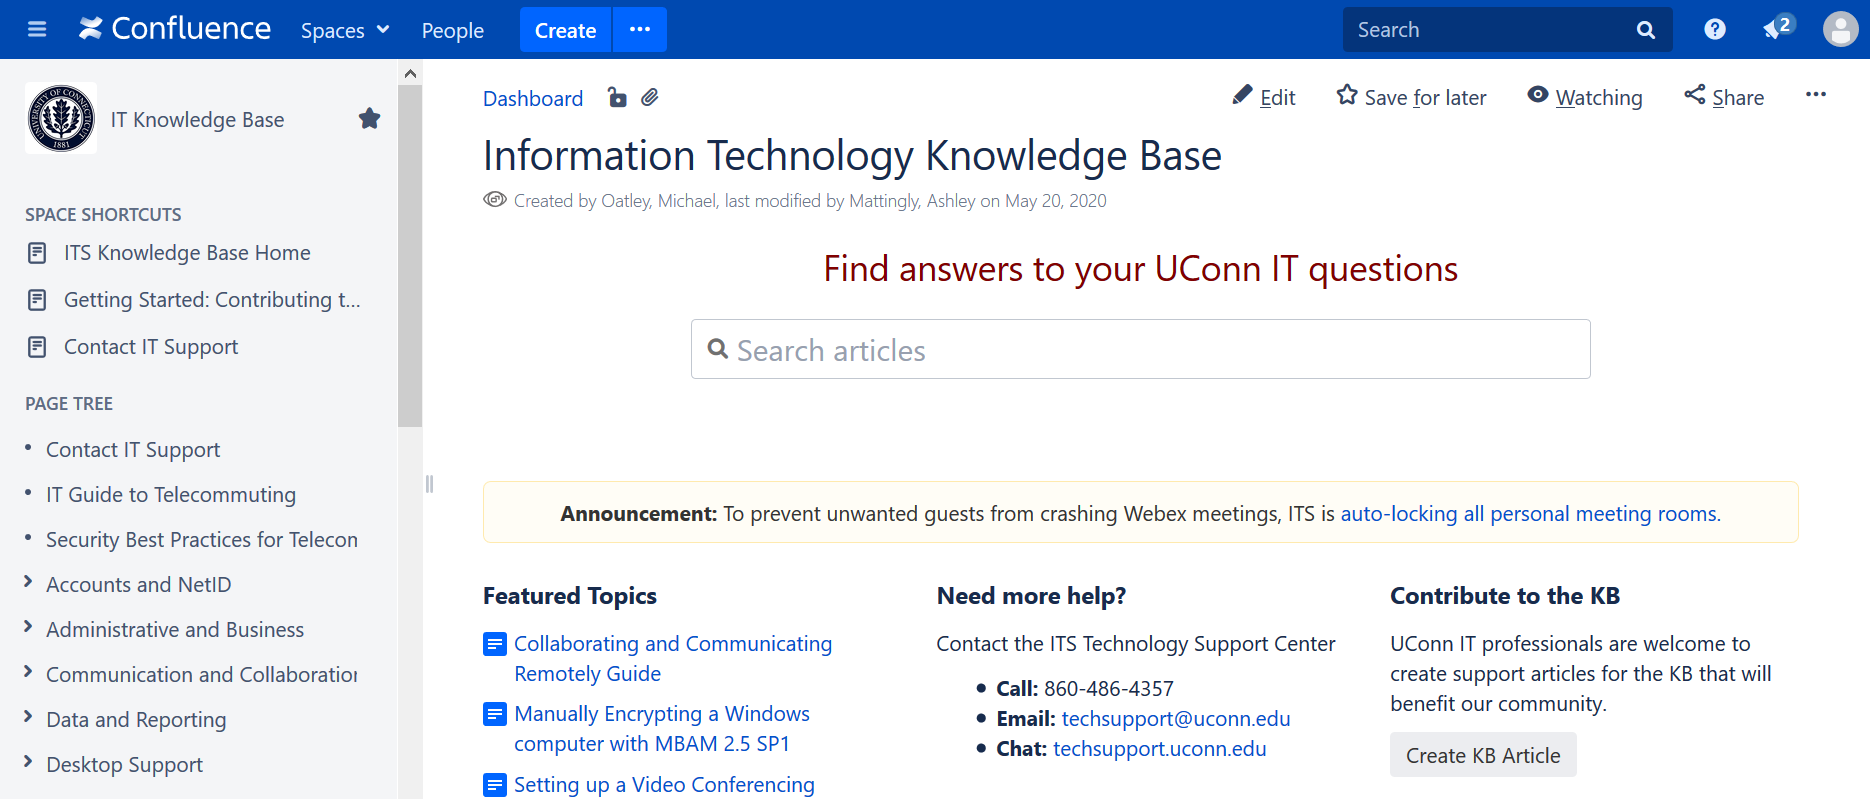 Confluence wiki platform being used as a knowledge base